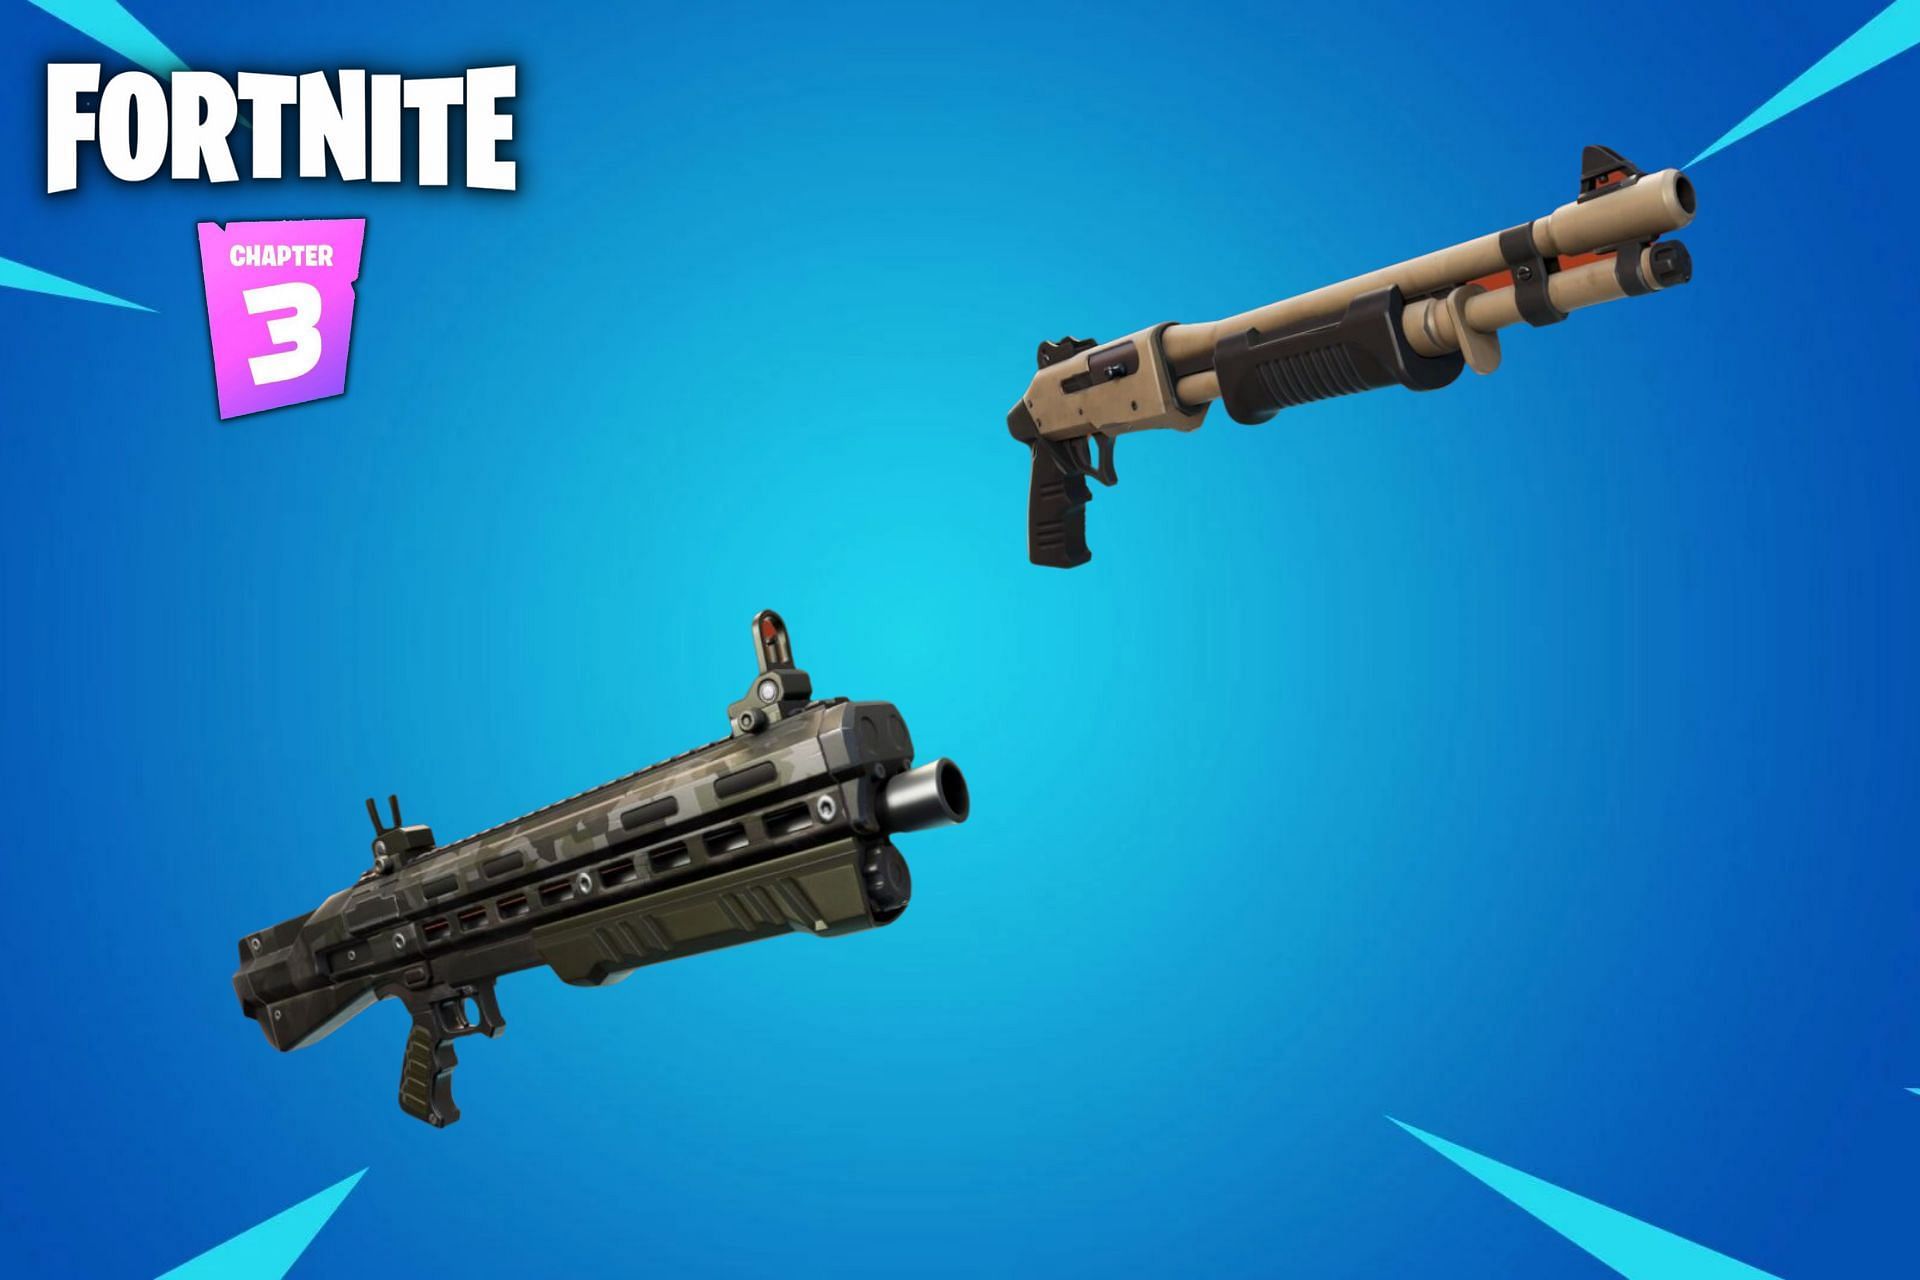 The state of Shotguns in Fortnite Chapter 3